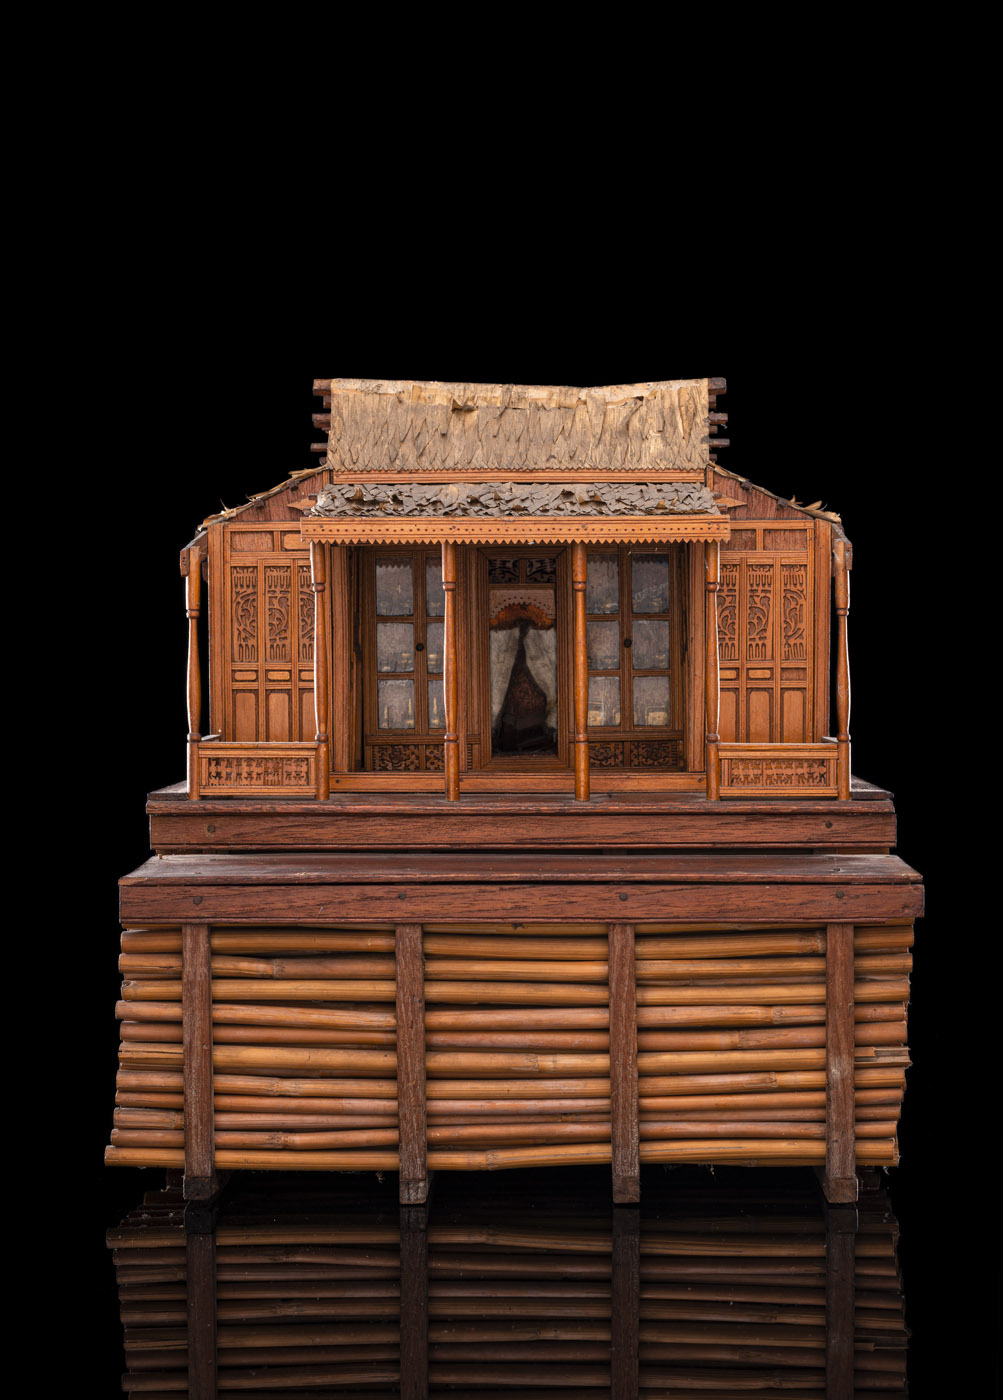 <b>A SCALE WOOD AND BAMBOO MODEL OF A TRADITIONAL ANTIQUES SHOP</b>